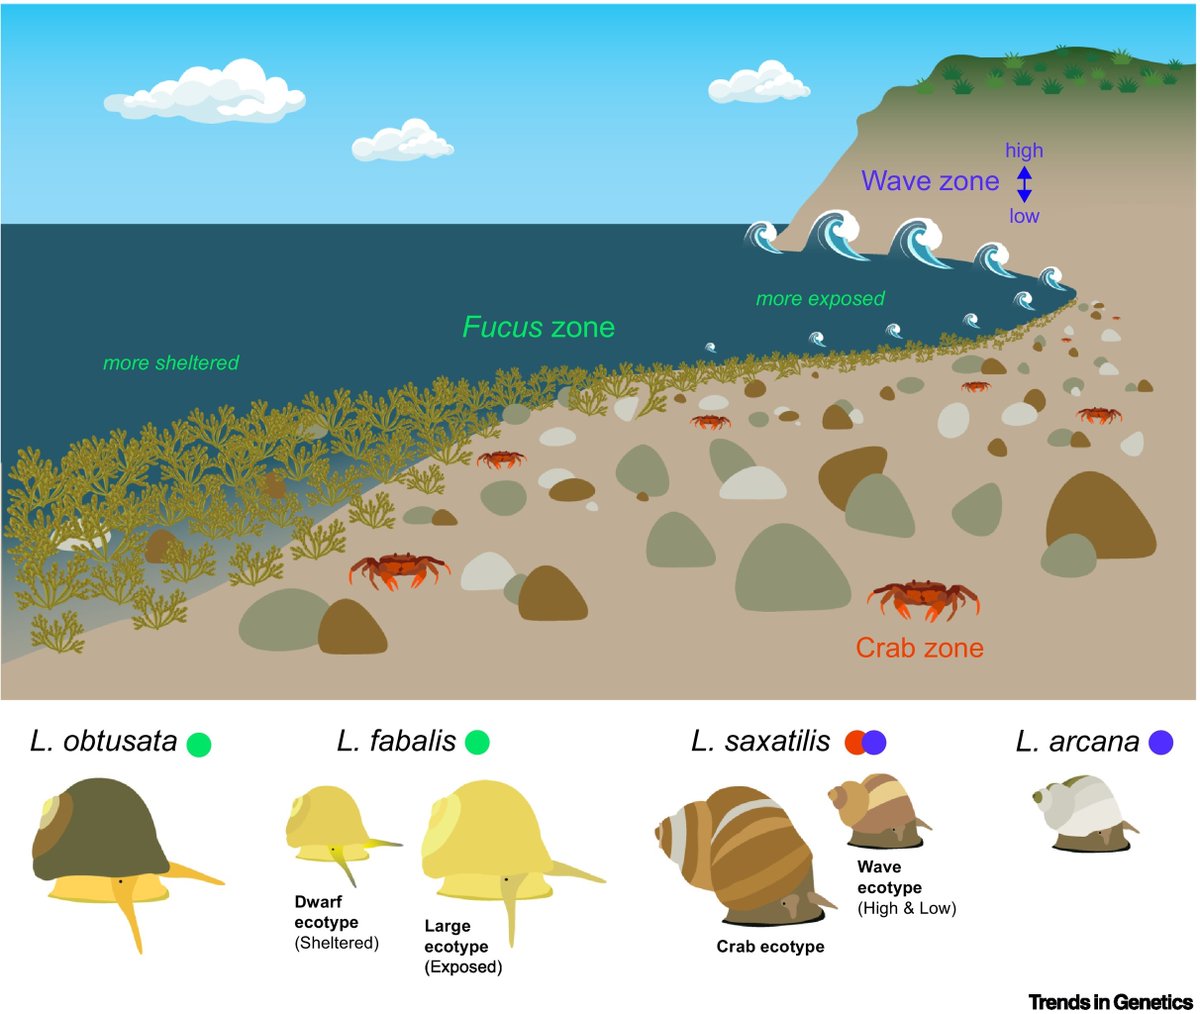 'Speciation is a key evolutionary process that is not yet fully understood.' Read here an interesting review about how 'marine snails (genus Littorina) have recently emerged as a model for speciation research.' #Science #Genetics #Biology #Ecology ⏯️cell.com/trends/genetic…